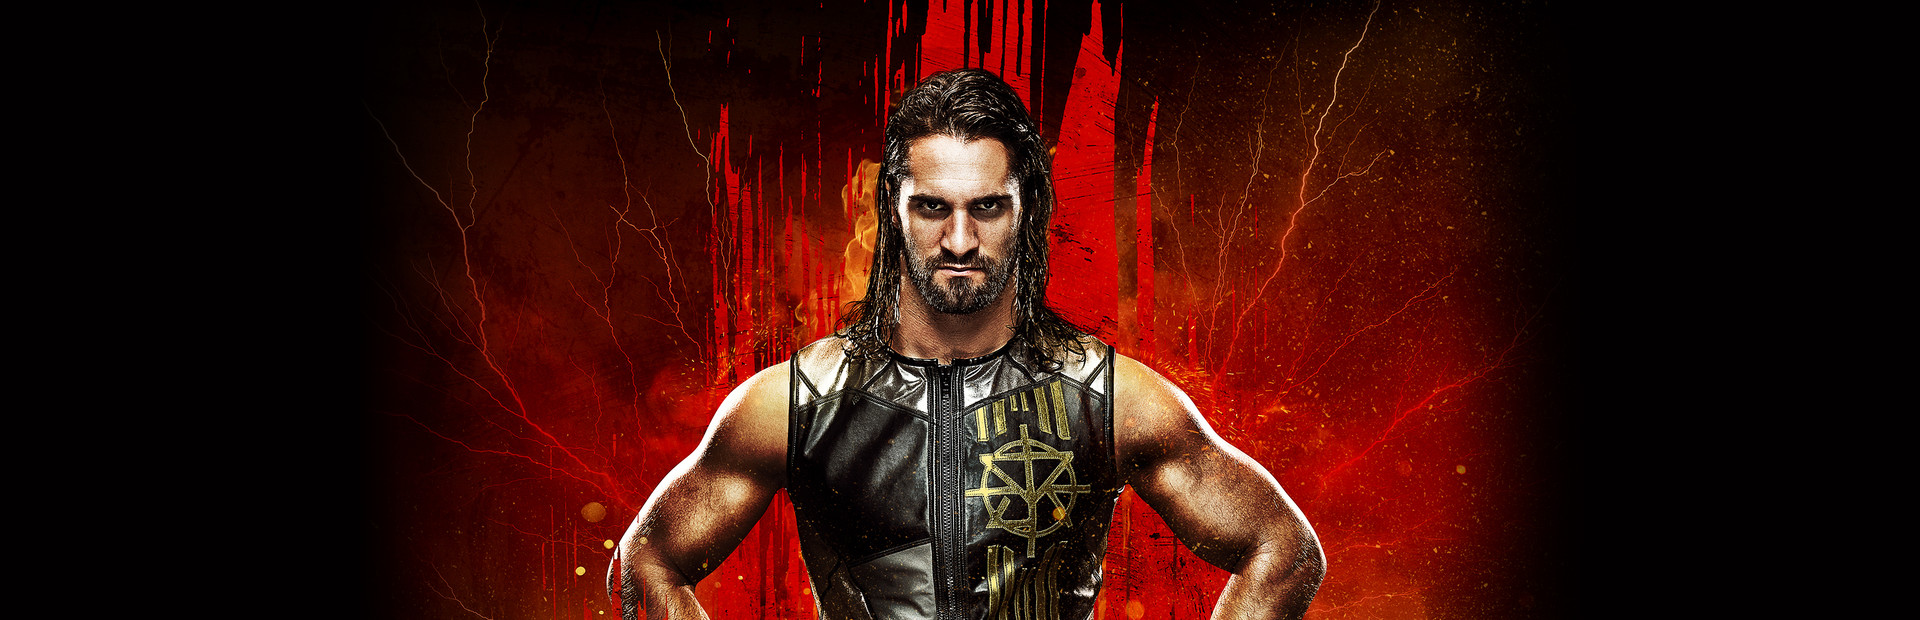 WWE 2K18 cover image